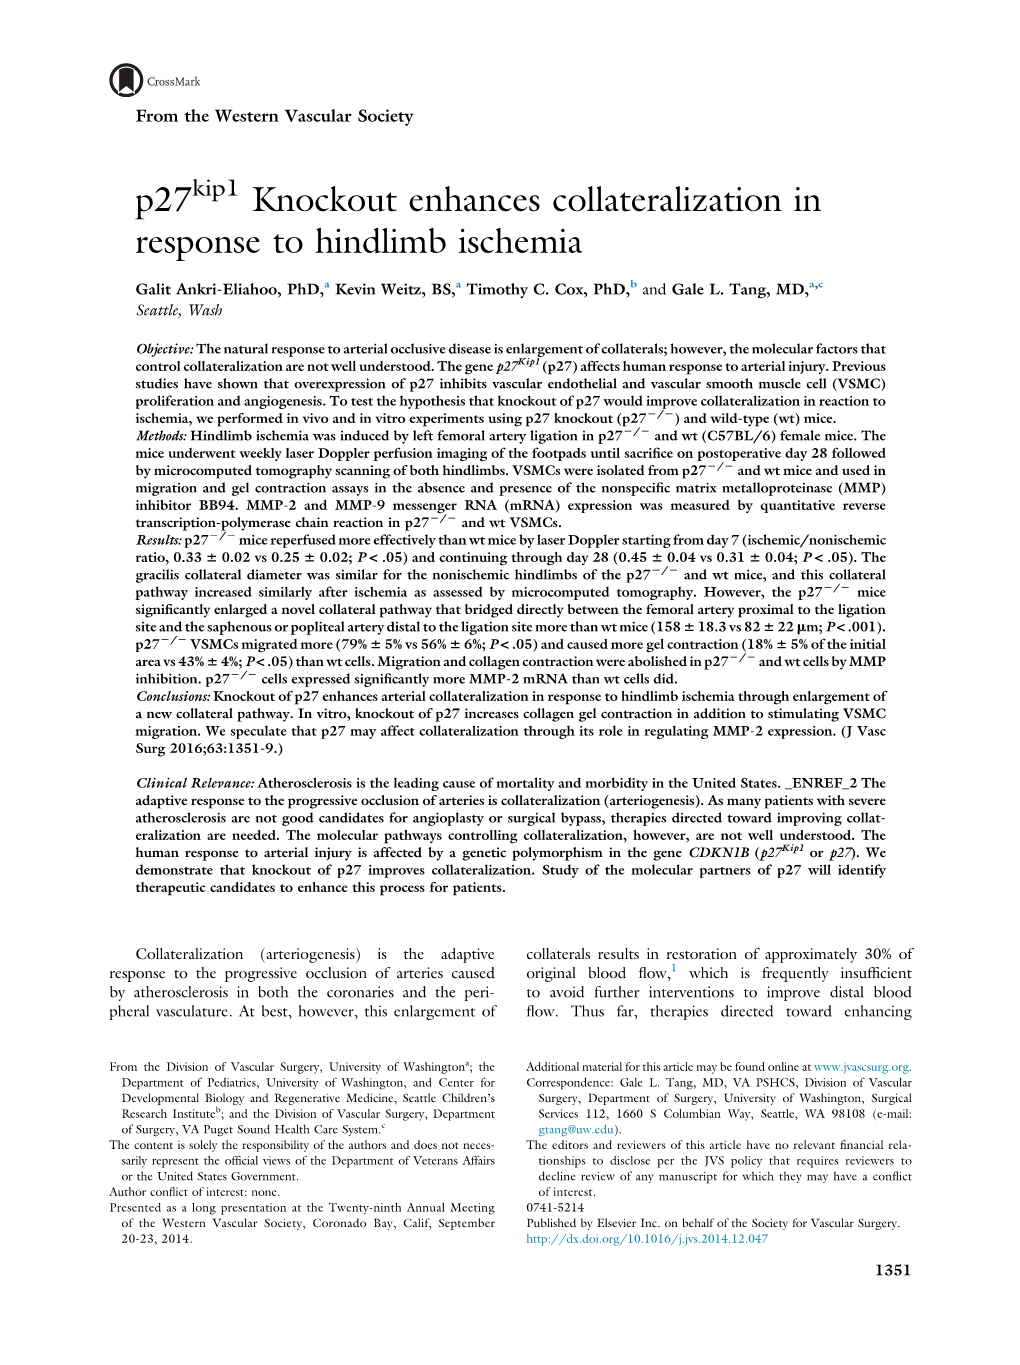 P27kip1 Knockout Enhances Collateralization in Response to Hindlimb Ischemia